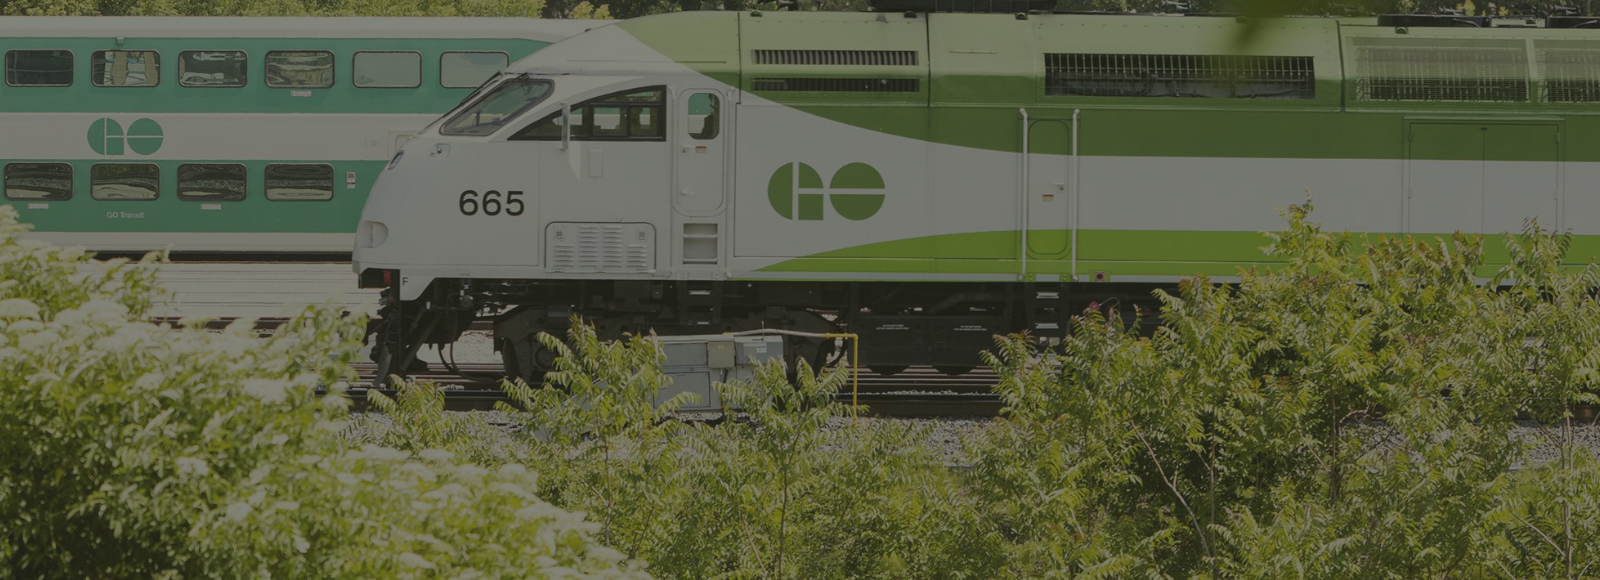 GO Trains on a track surrounded by trees. 